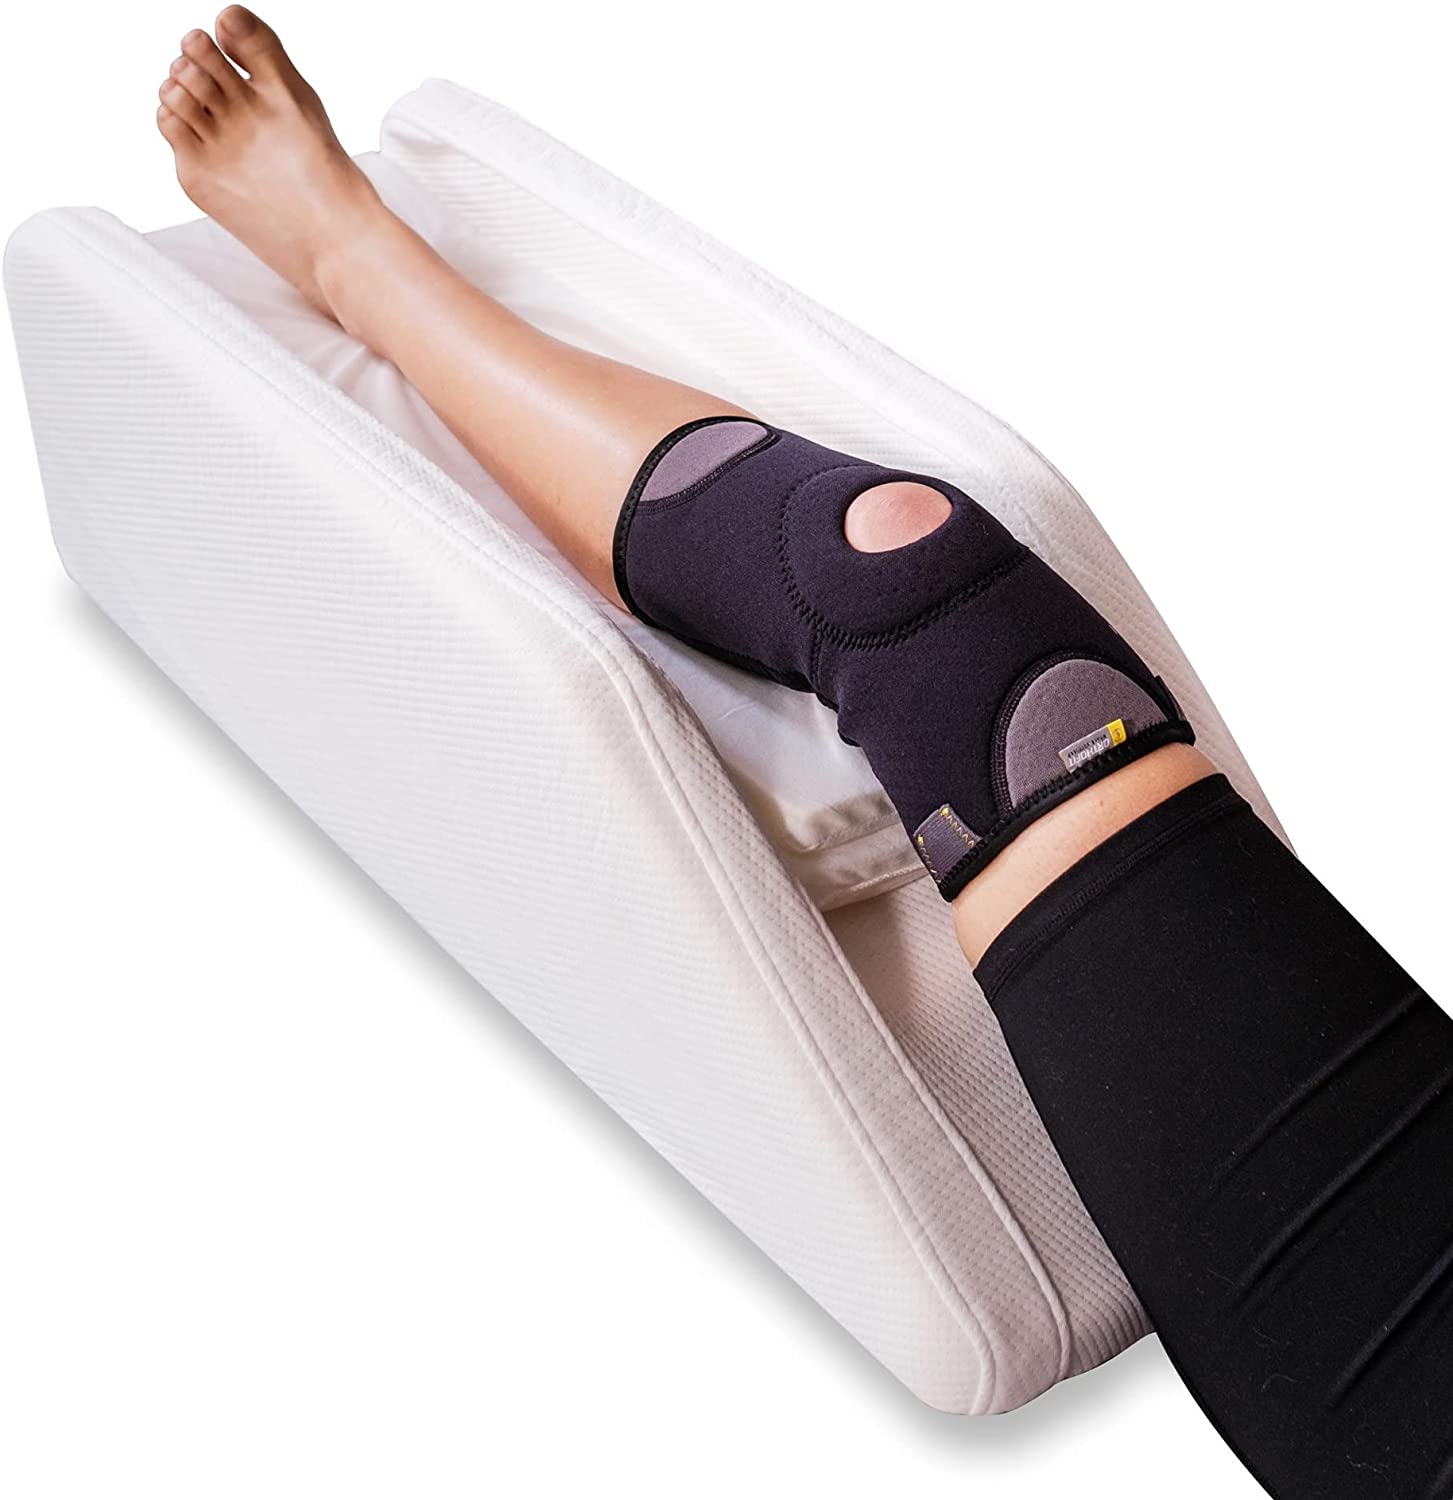 How to Splint an Ankle With a Pillow